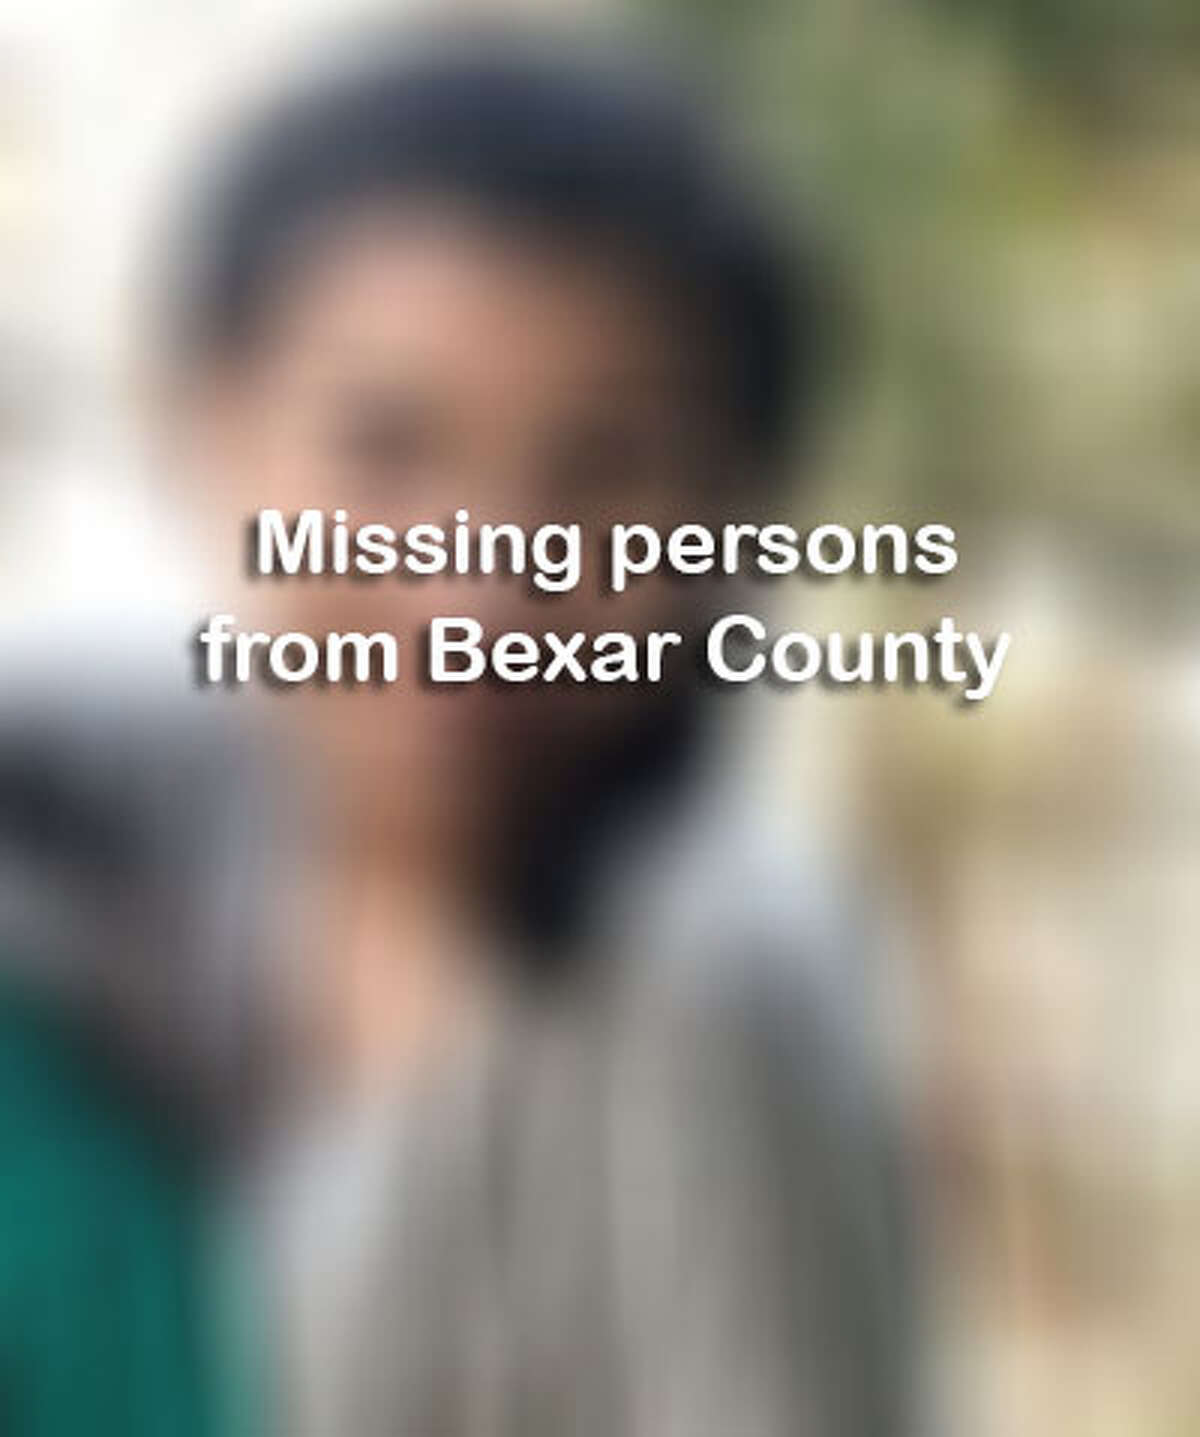 Missing persons from Bexar County